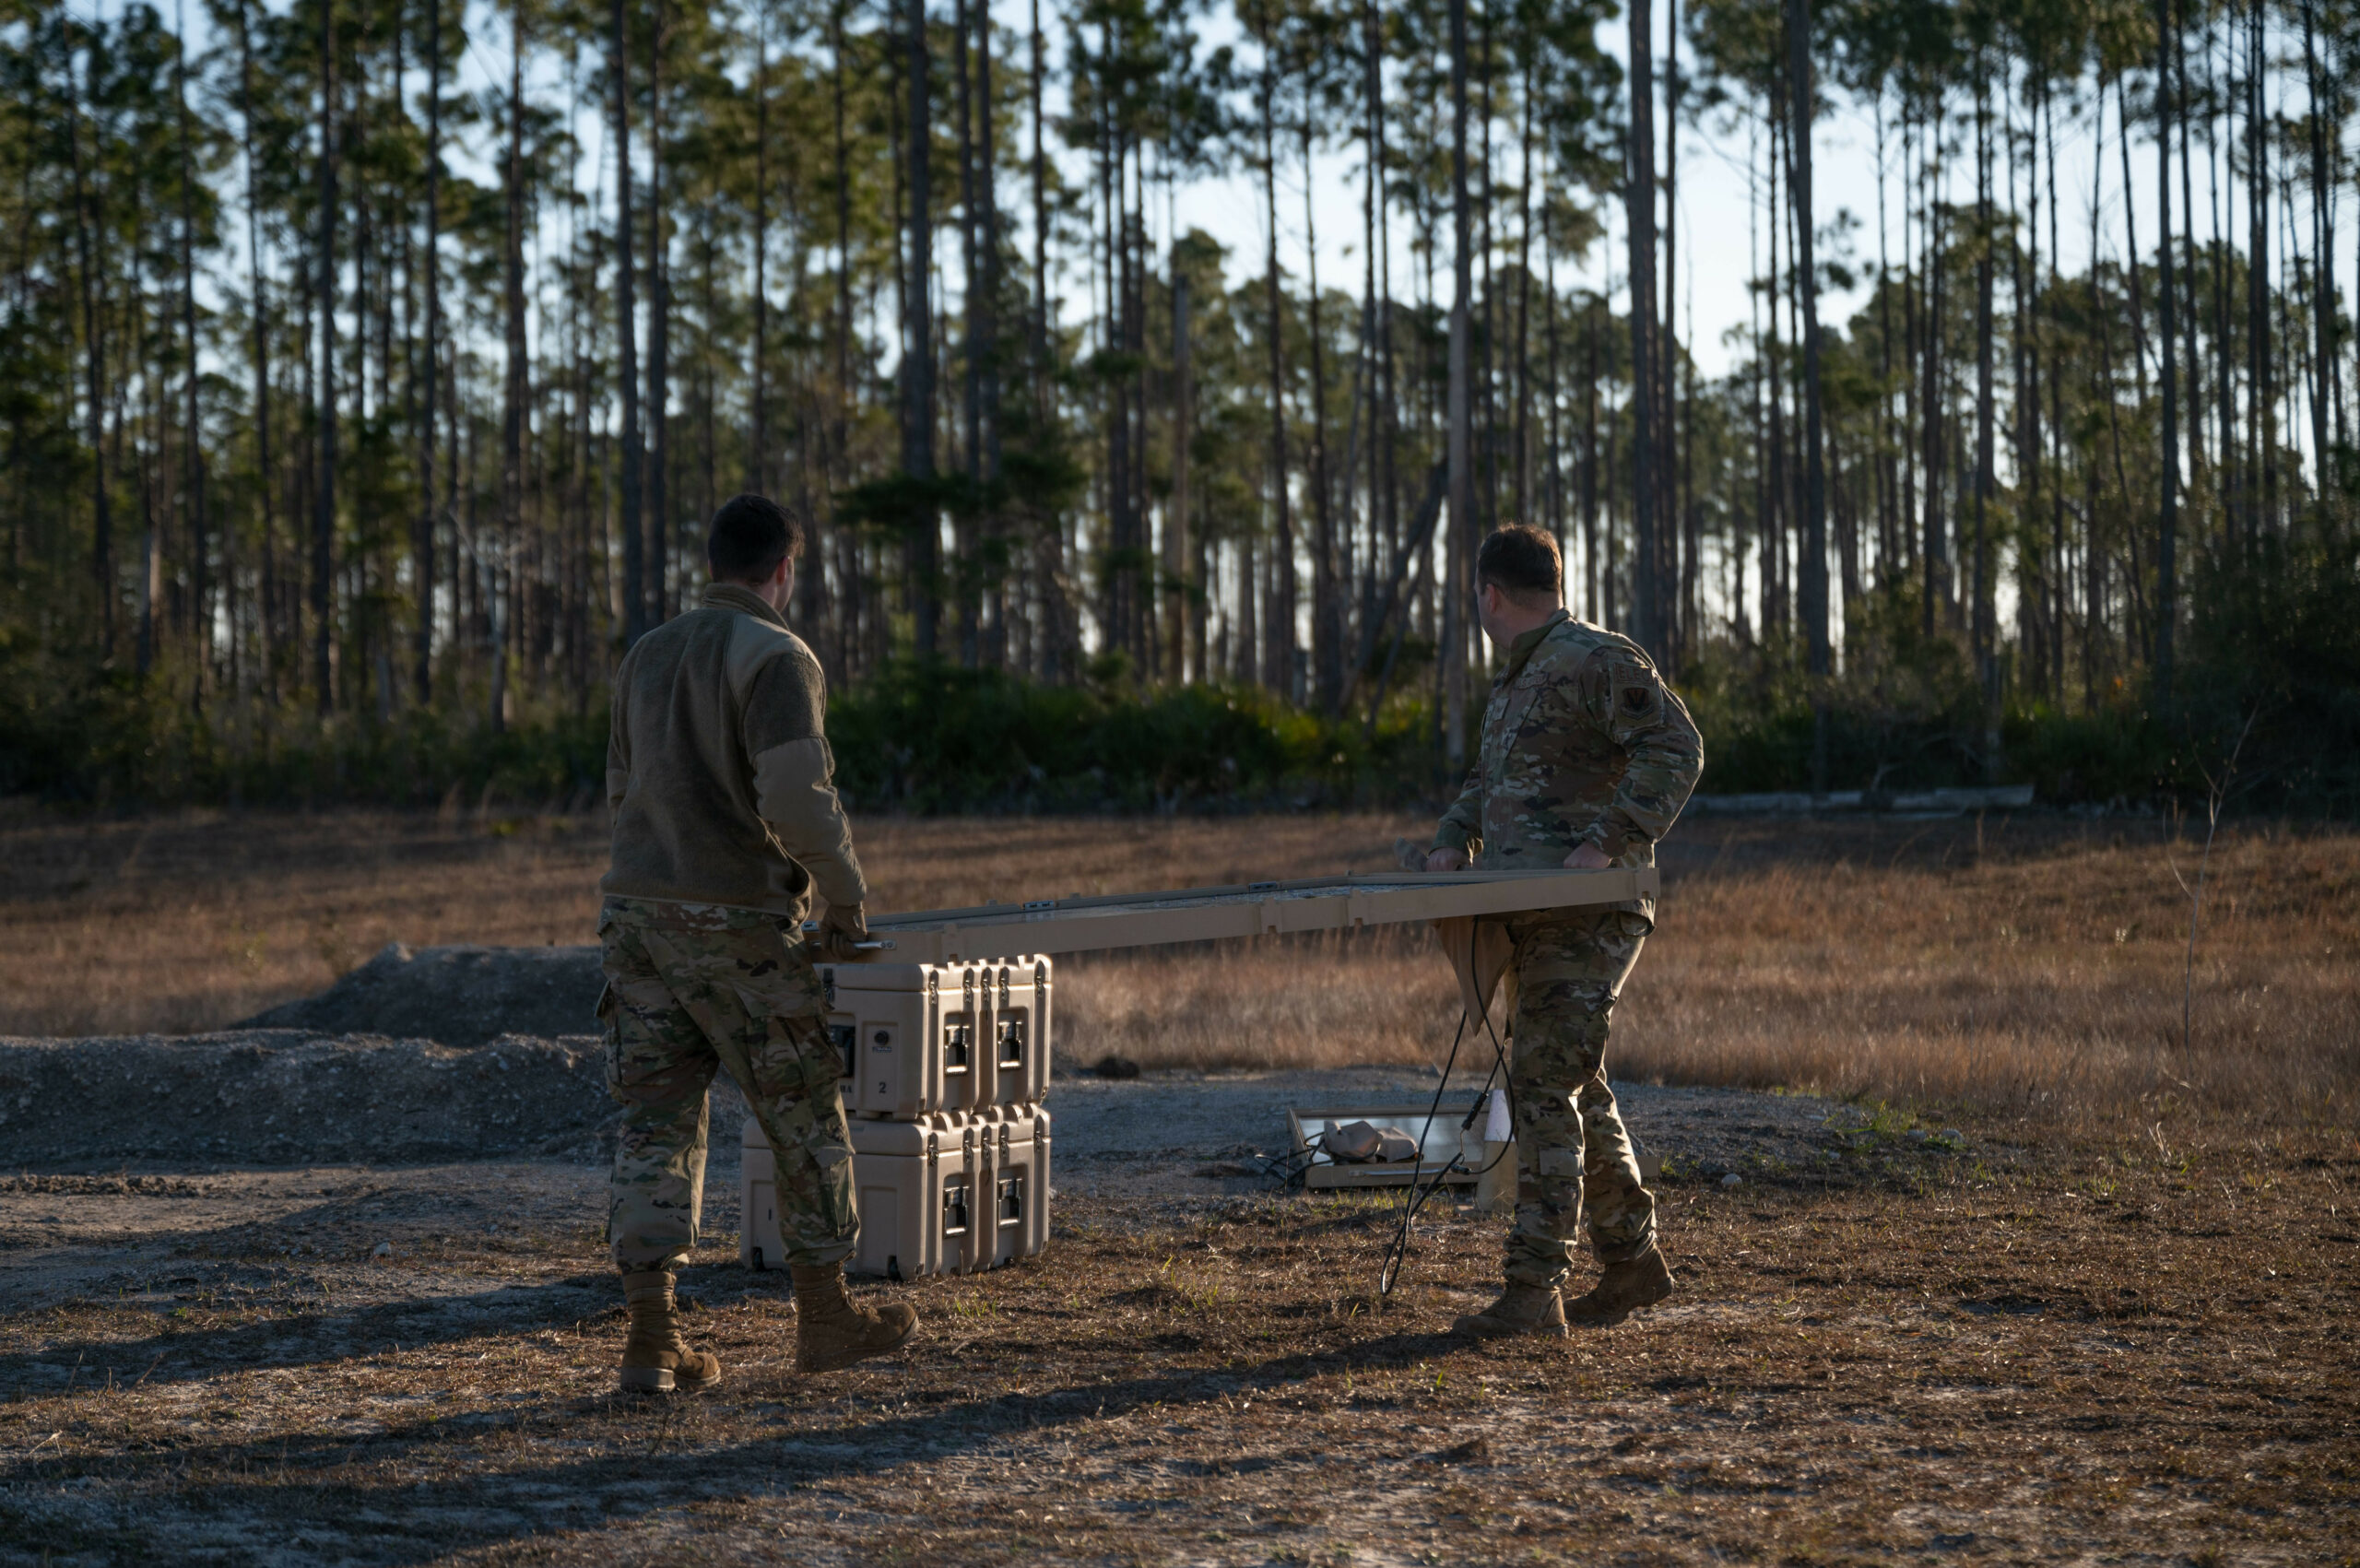 U.S. Airmen prepare to assemble an Expeditionary Airfield Lighting System (EALS-C) at Tyndall Air Force Base, Florida, Jan. 27, 2023. The proper setup, use and break down of the EALS-C system was taught to electrical systems Airmen from different Air Force installations in the new Mission Essential Equipment Training held at Tyndall AFB. (U.S. Air Force photo by Senior Airman Anabel Del Valle)